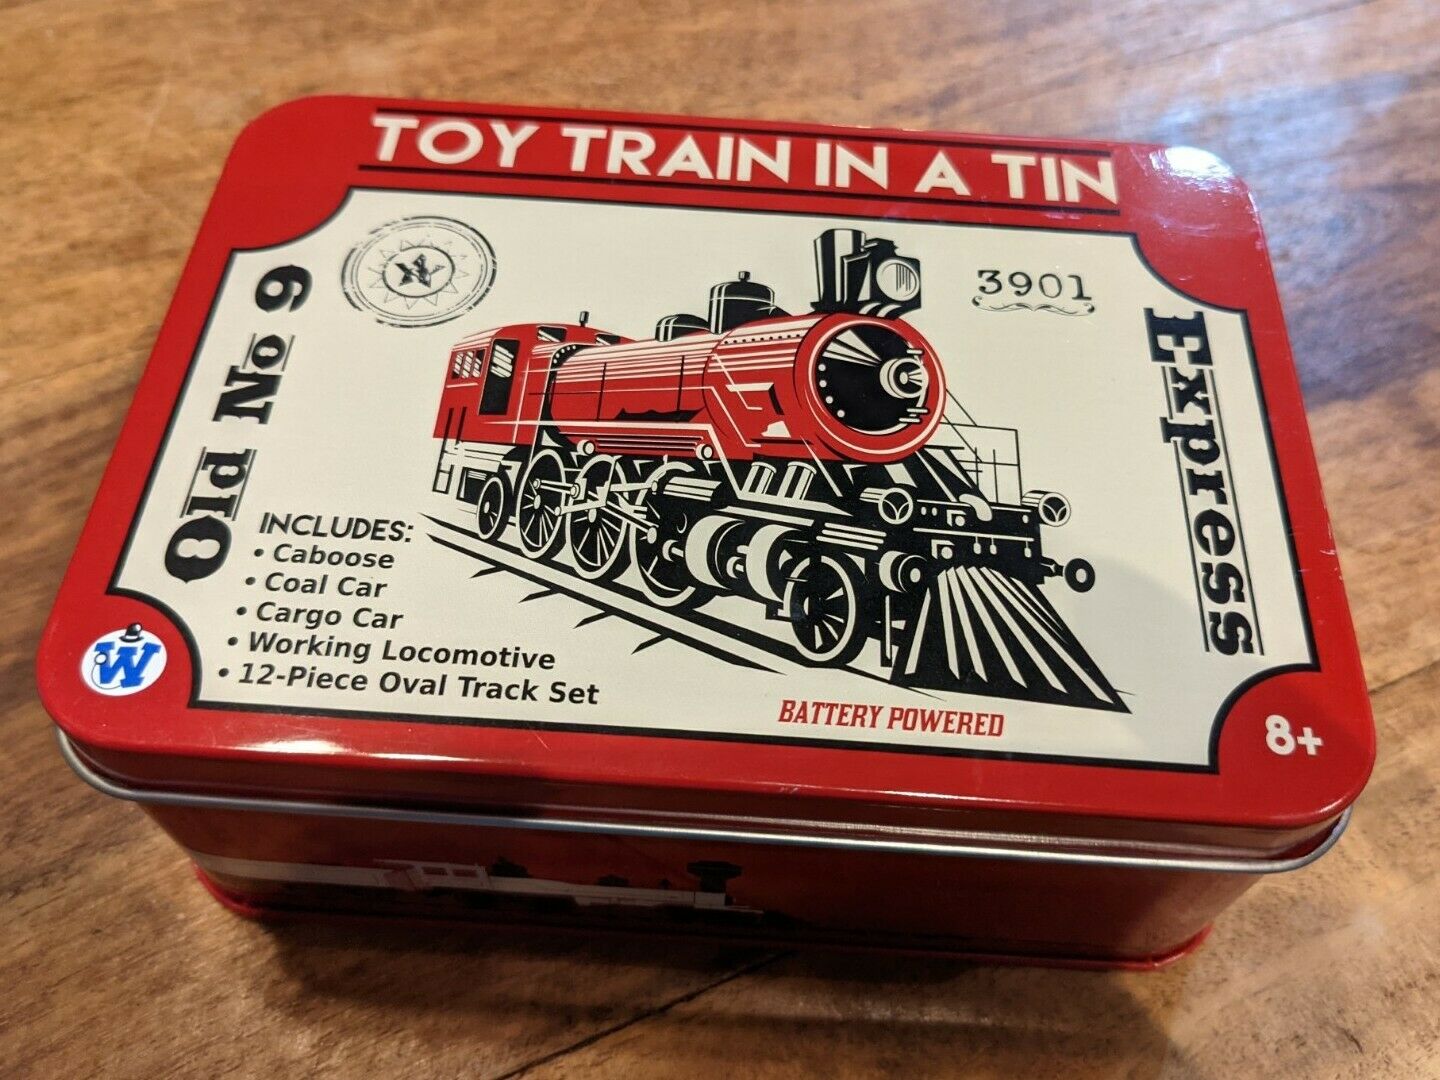 Old No 9 Express Toy Train In A Tin Battery Operated ✅ Tested ✅ Works